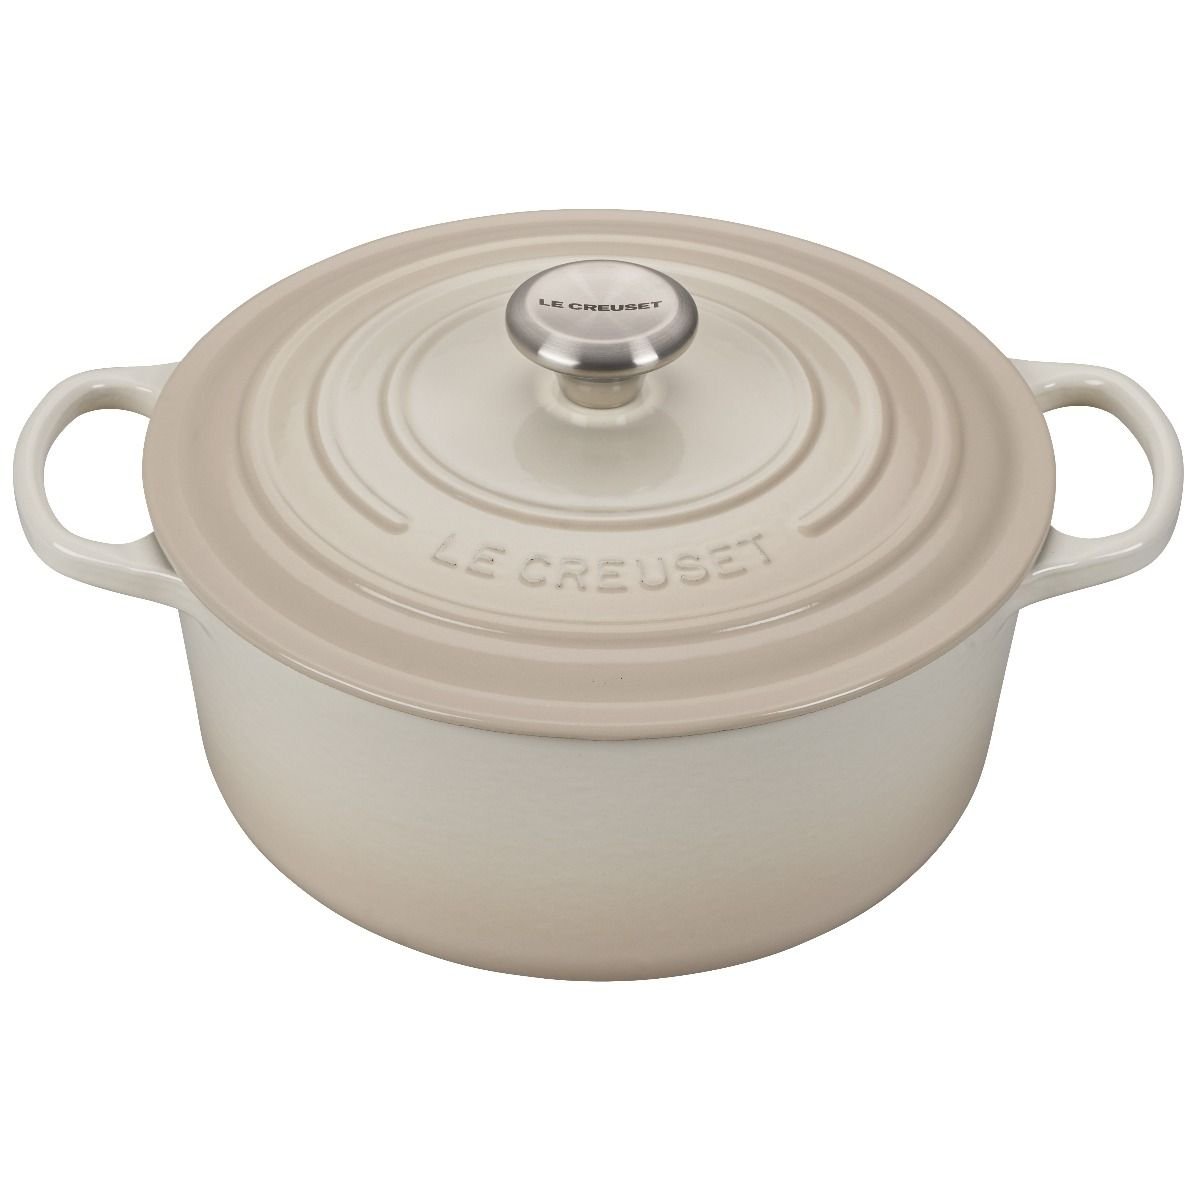 Round French Oven 5.5 qt. Meringue Enameled Cast Iron | Le Creuset | Everything